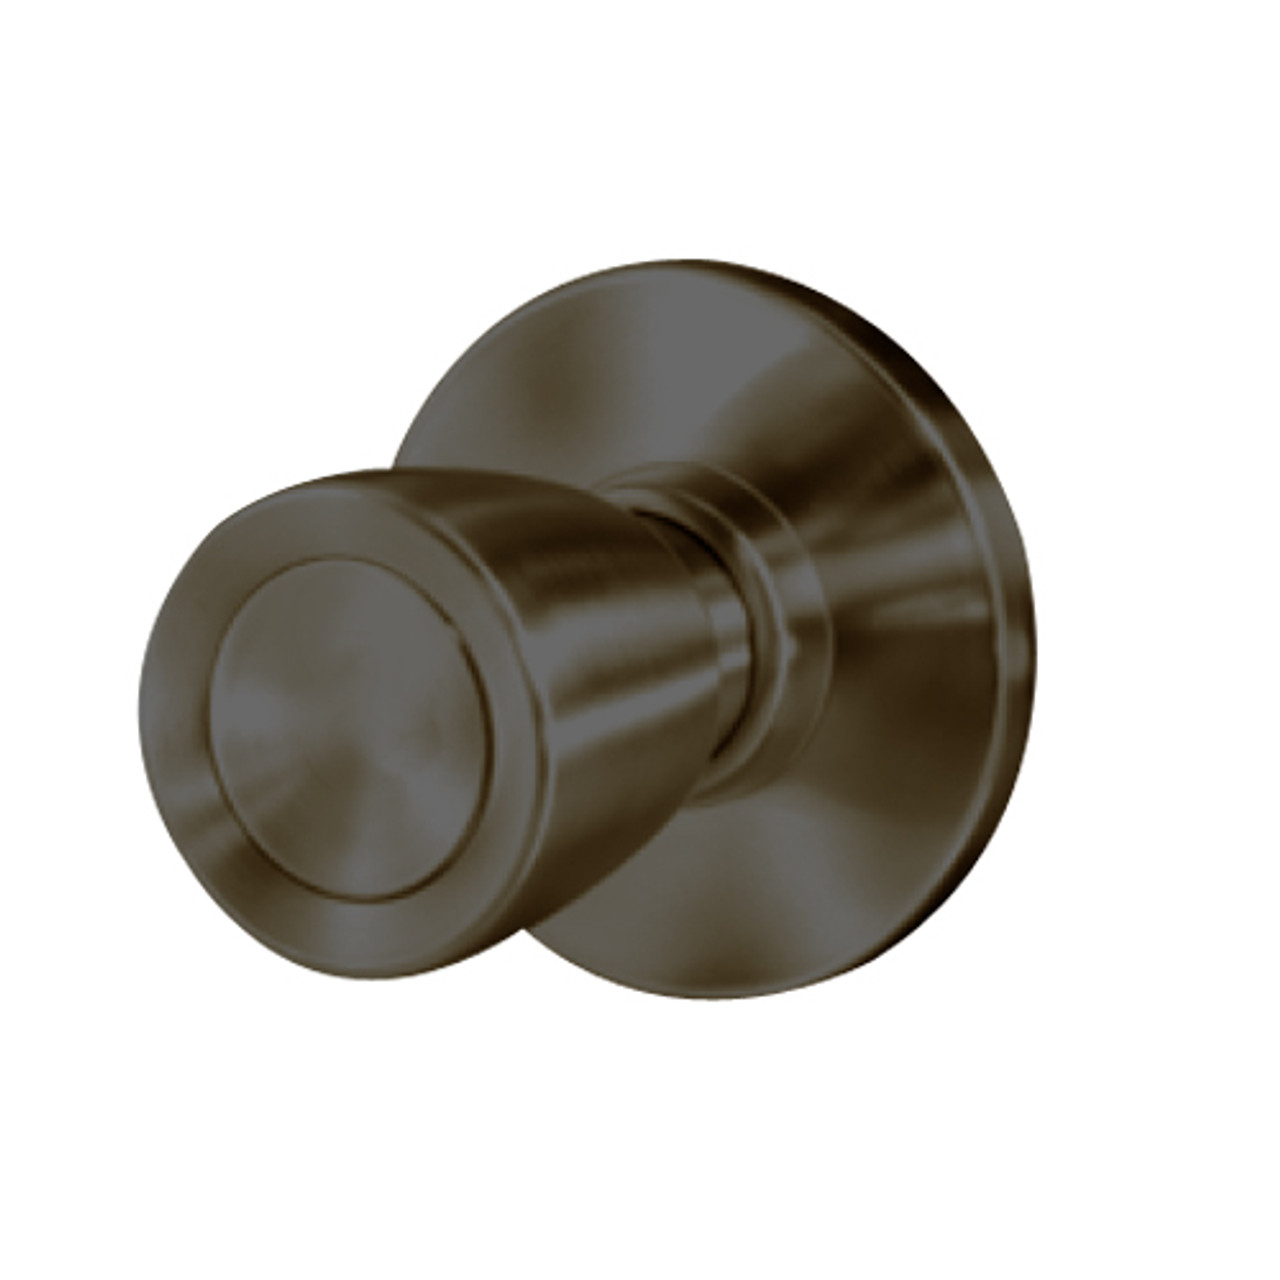 8K30N6ASTK613 Best 8K Series Passage Heavy Duty Cylindrical Knob Locks with Tulip Style in Oil Rubbed Bronze